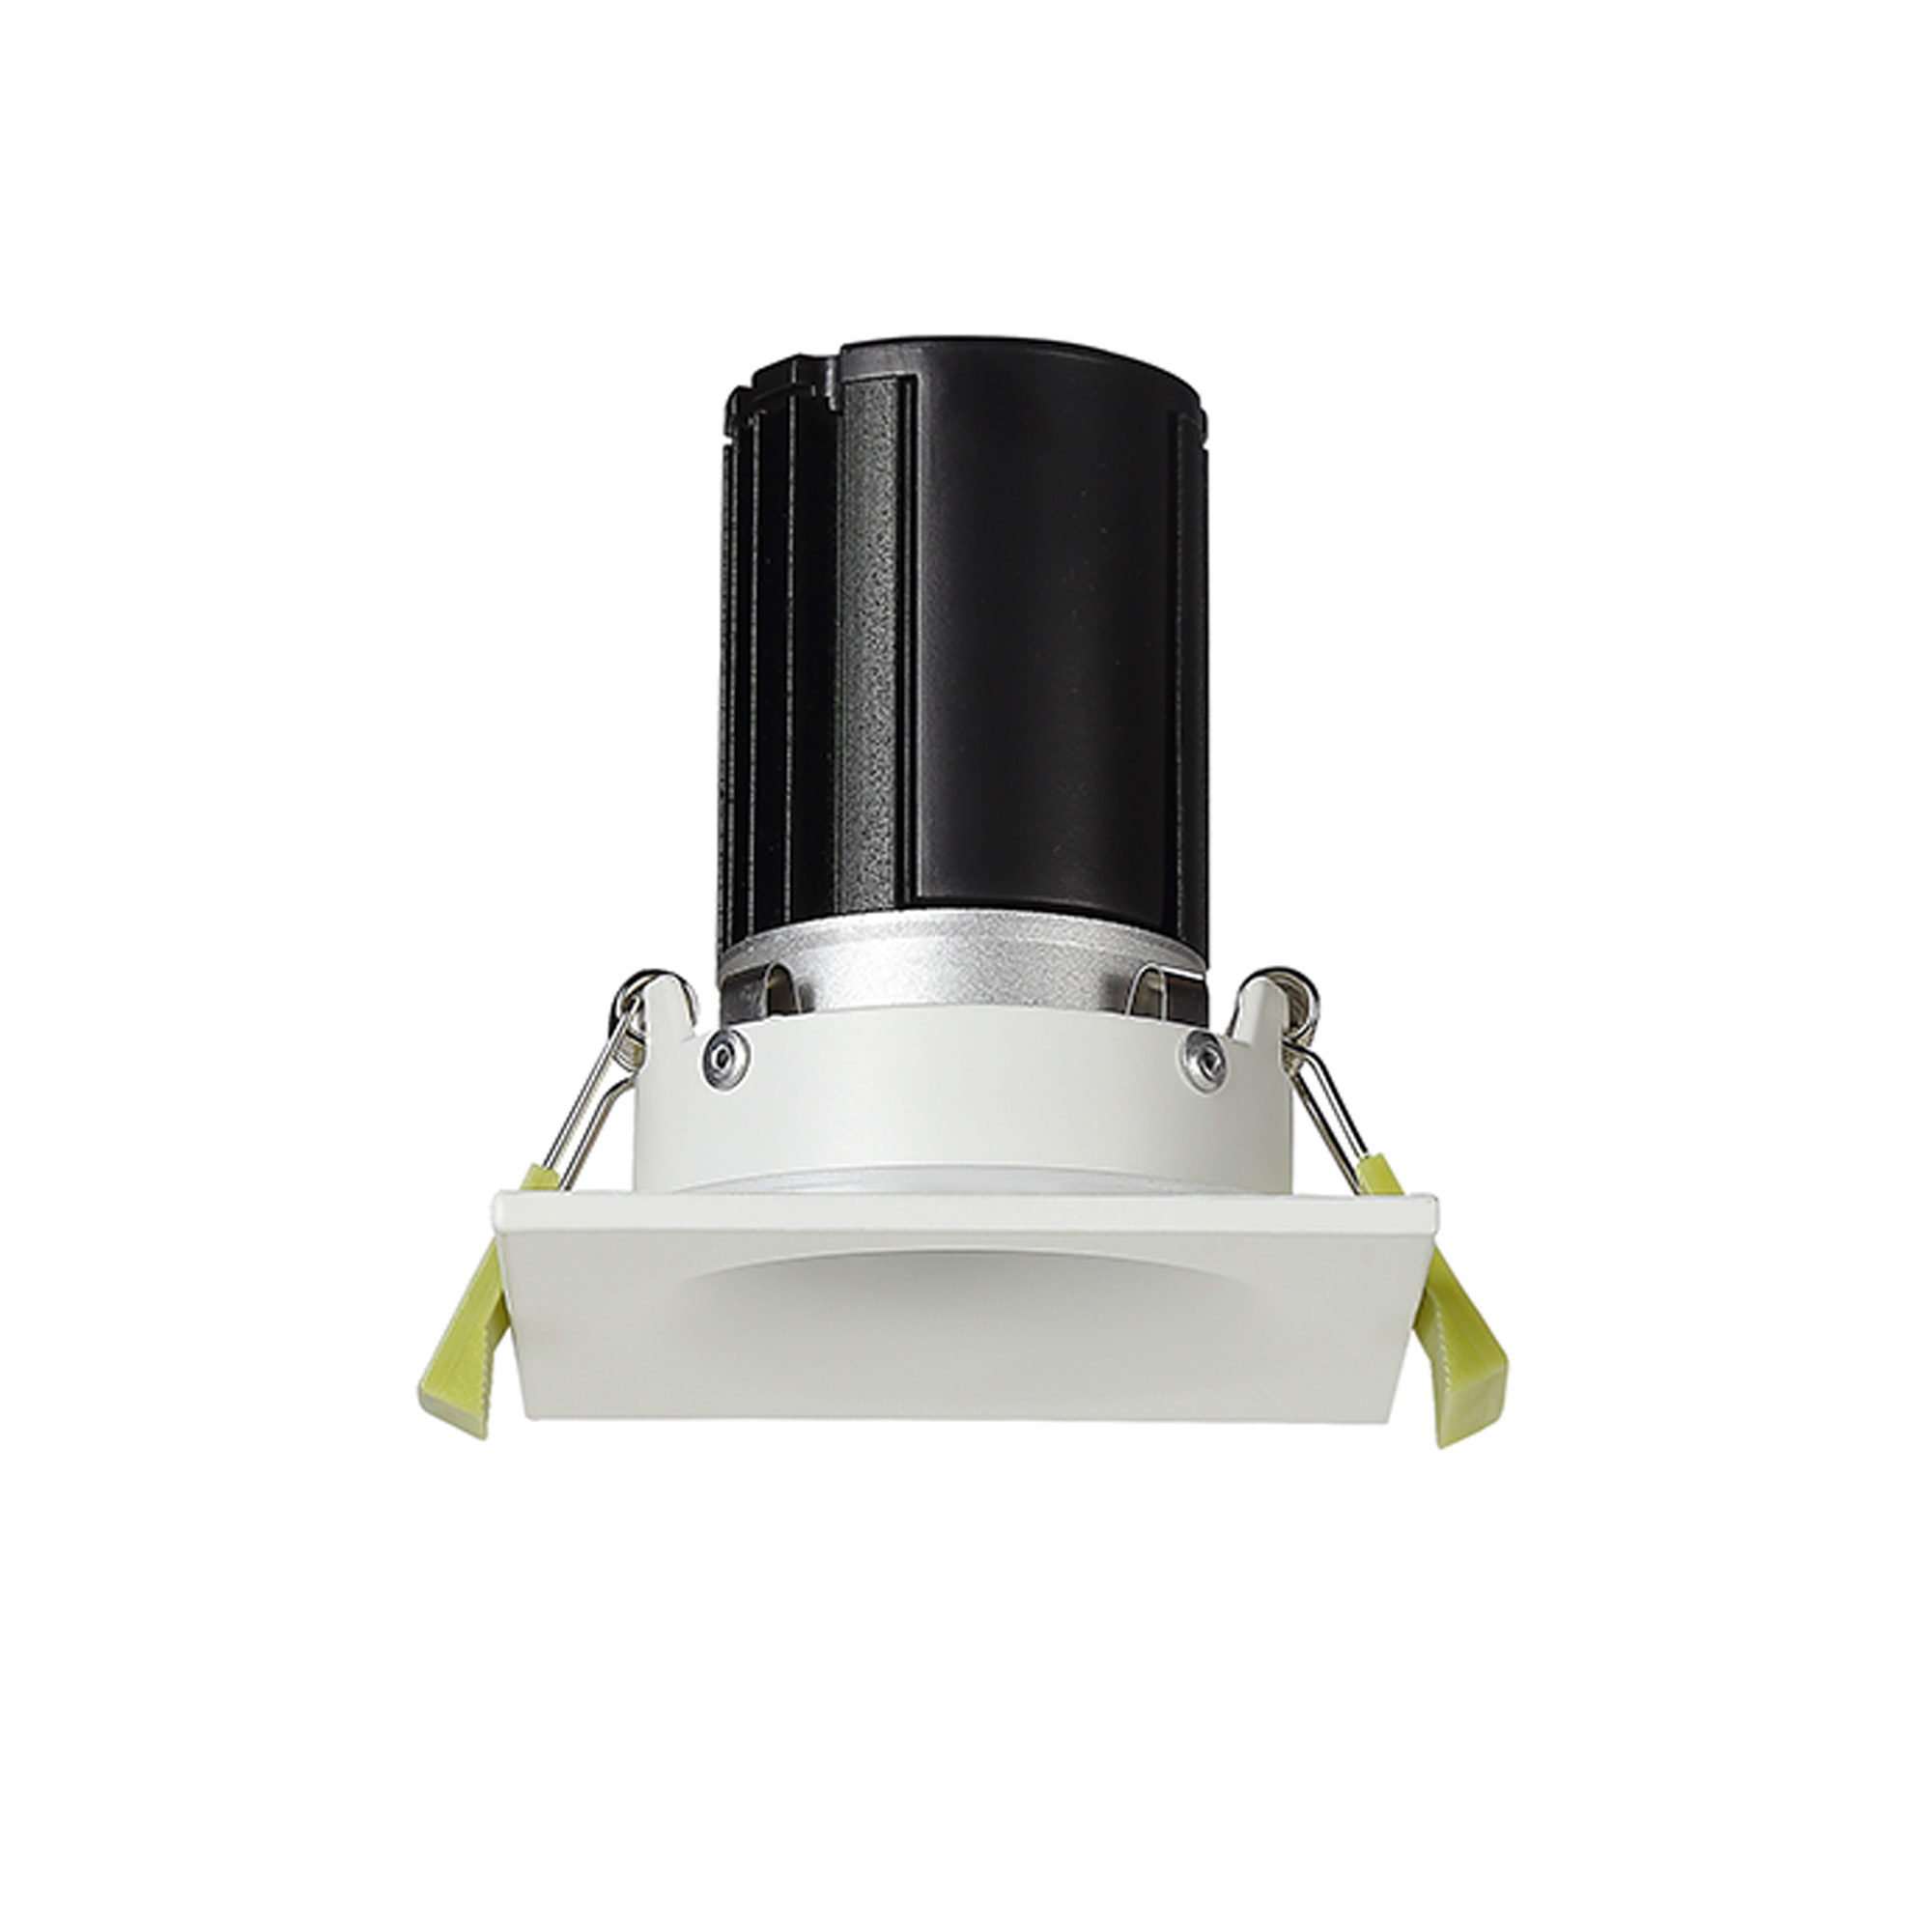 DM201498  Bruve 9 Tridonic powered 9W 2700K 700lm 24° LED Engine;250mA ; CRI>90 LED Engine Matt White Fixed Square Recessed Downlight; Inner Glass cover; IP65